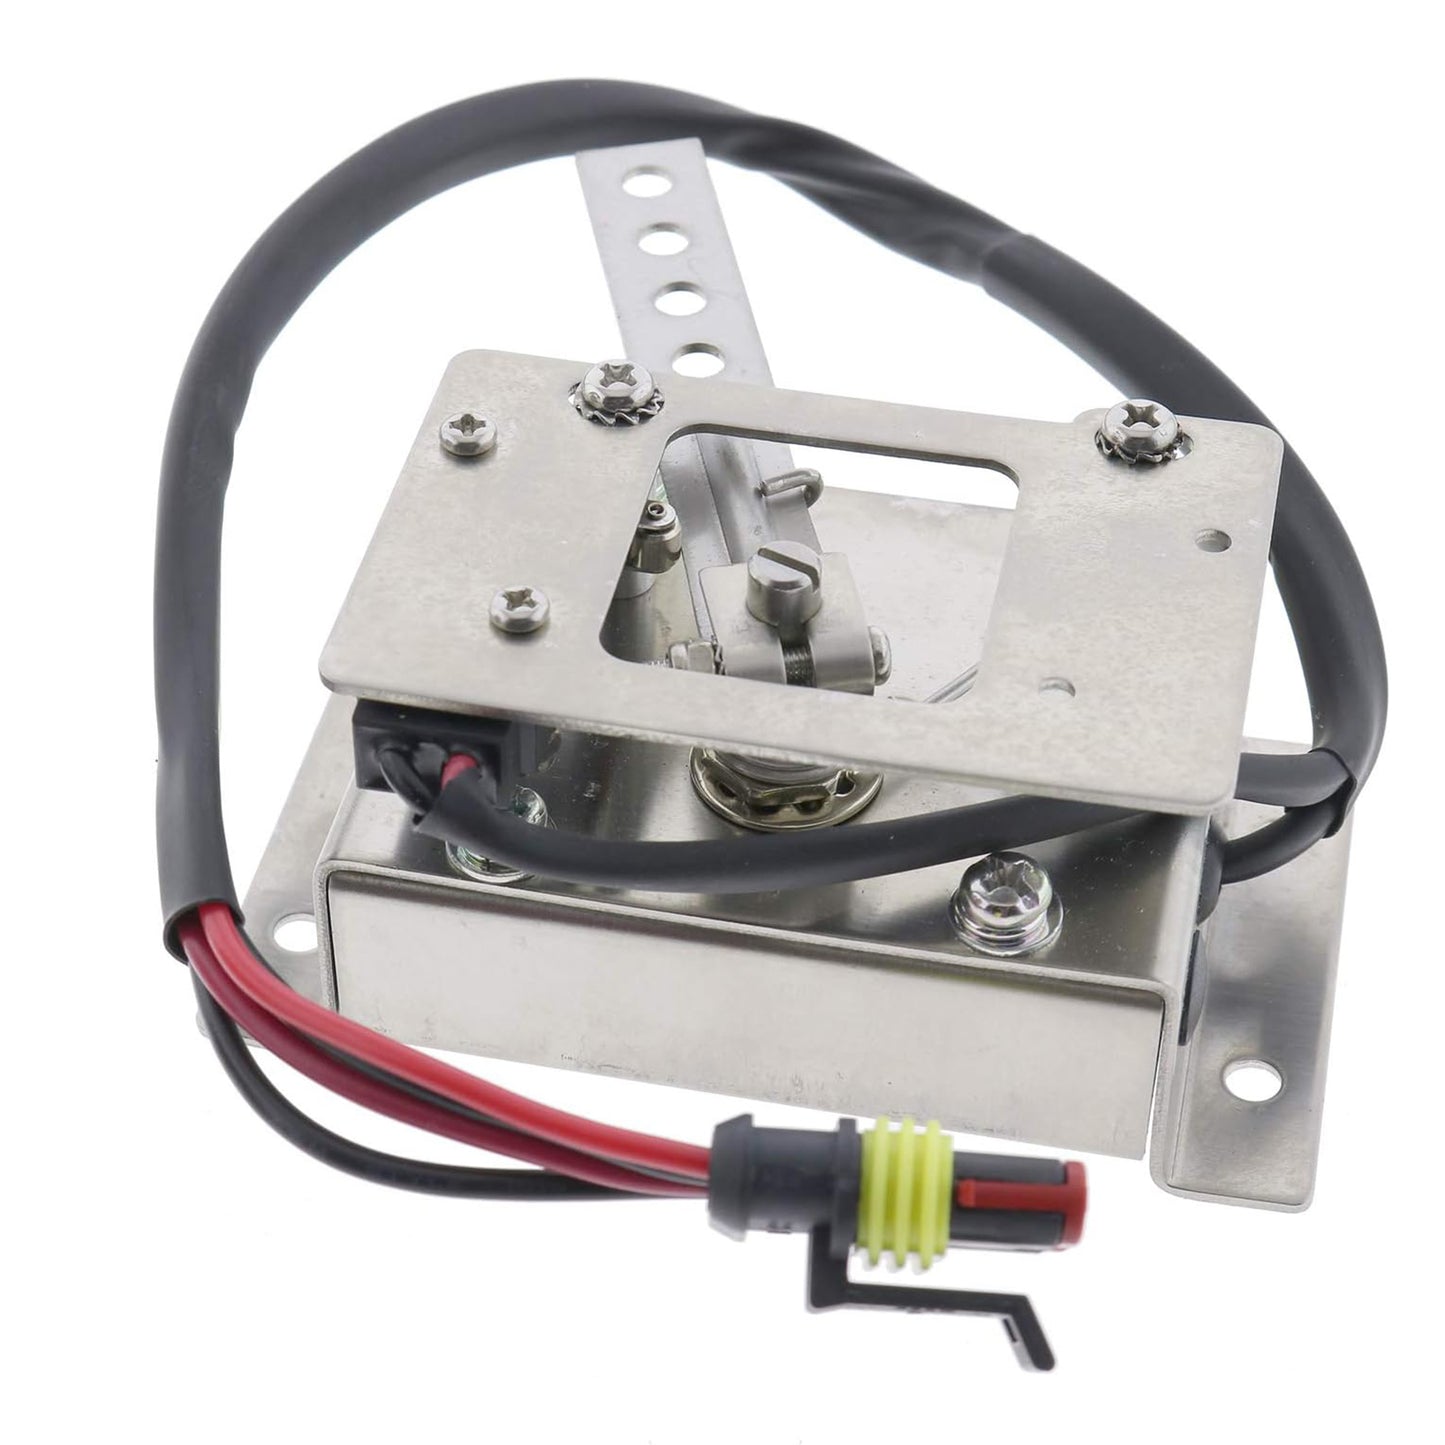 PB-6 Throttle With MS 3 Wires Compatible With Curtis PB 8 Type Potentiometer